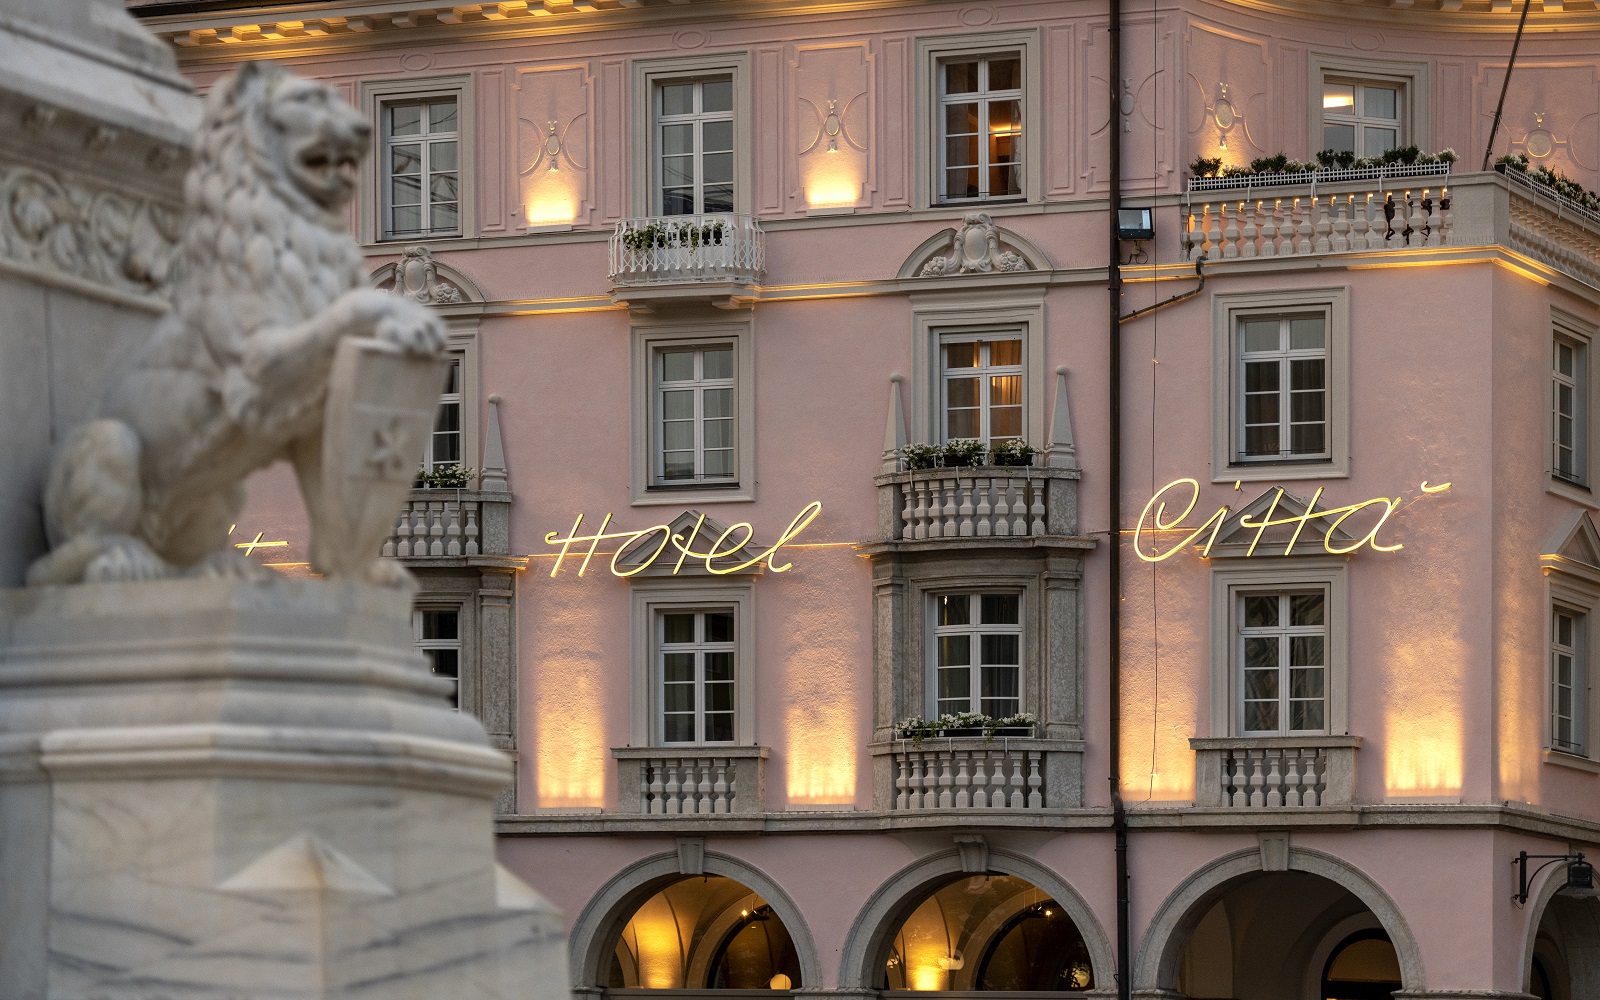 the pink and grey turn of the century style facade of Hotel Citta with marble statue in foreground